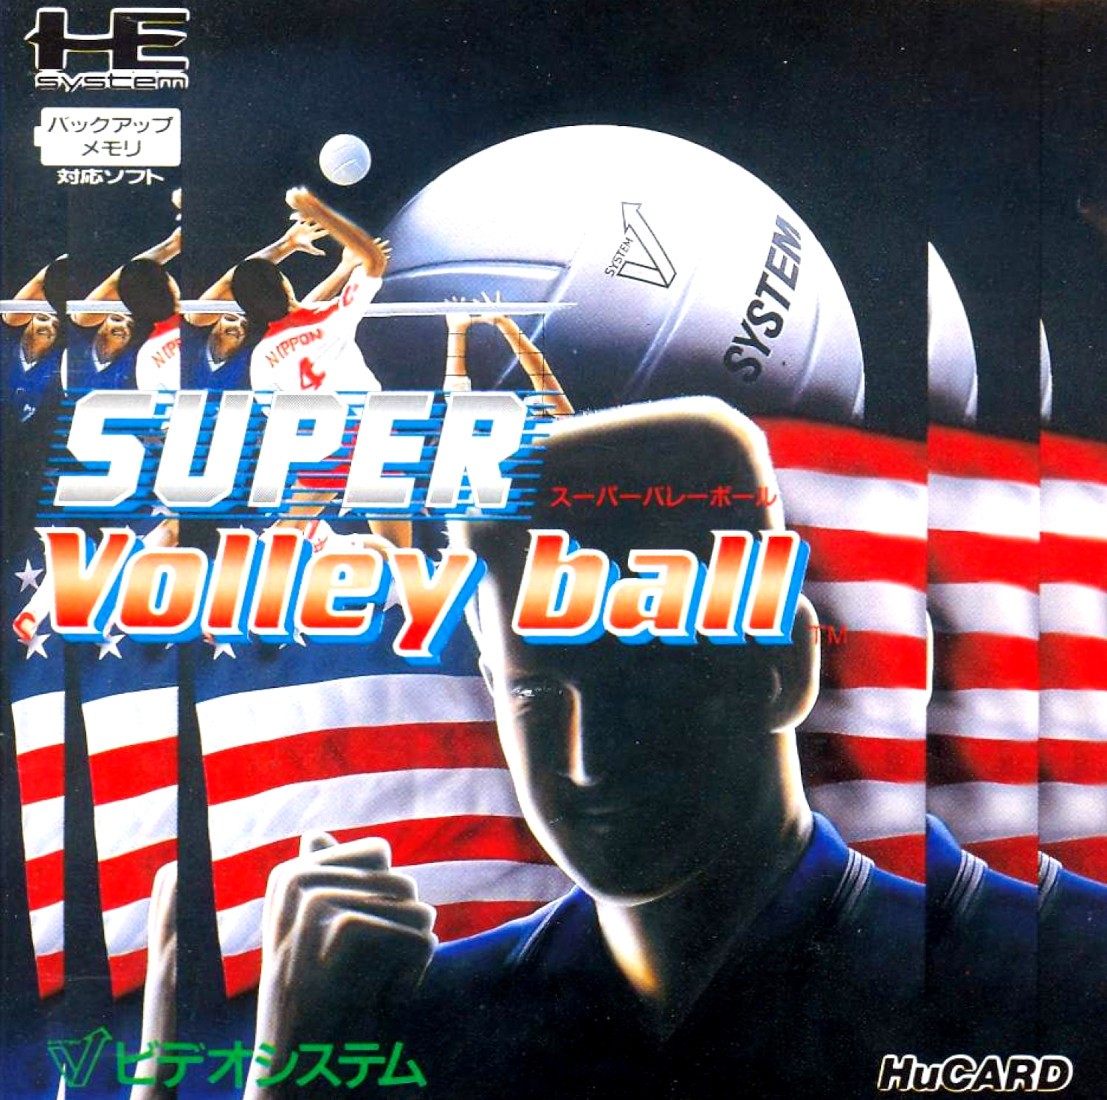 SUPER Volley ball cover